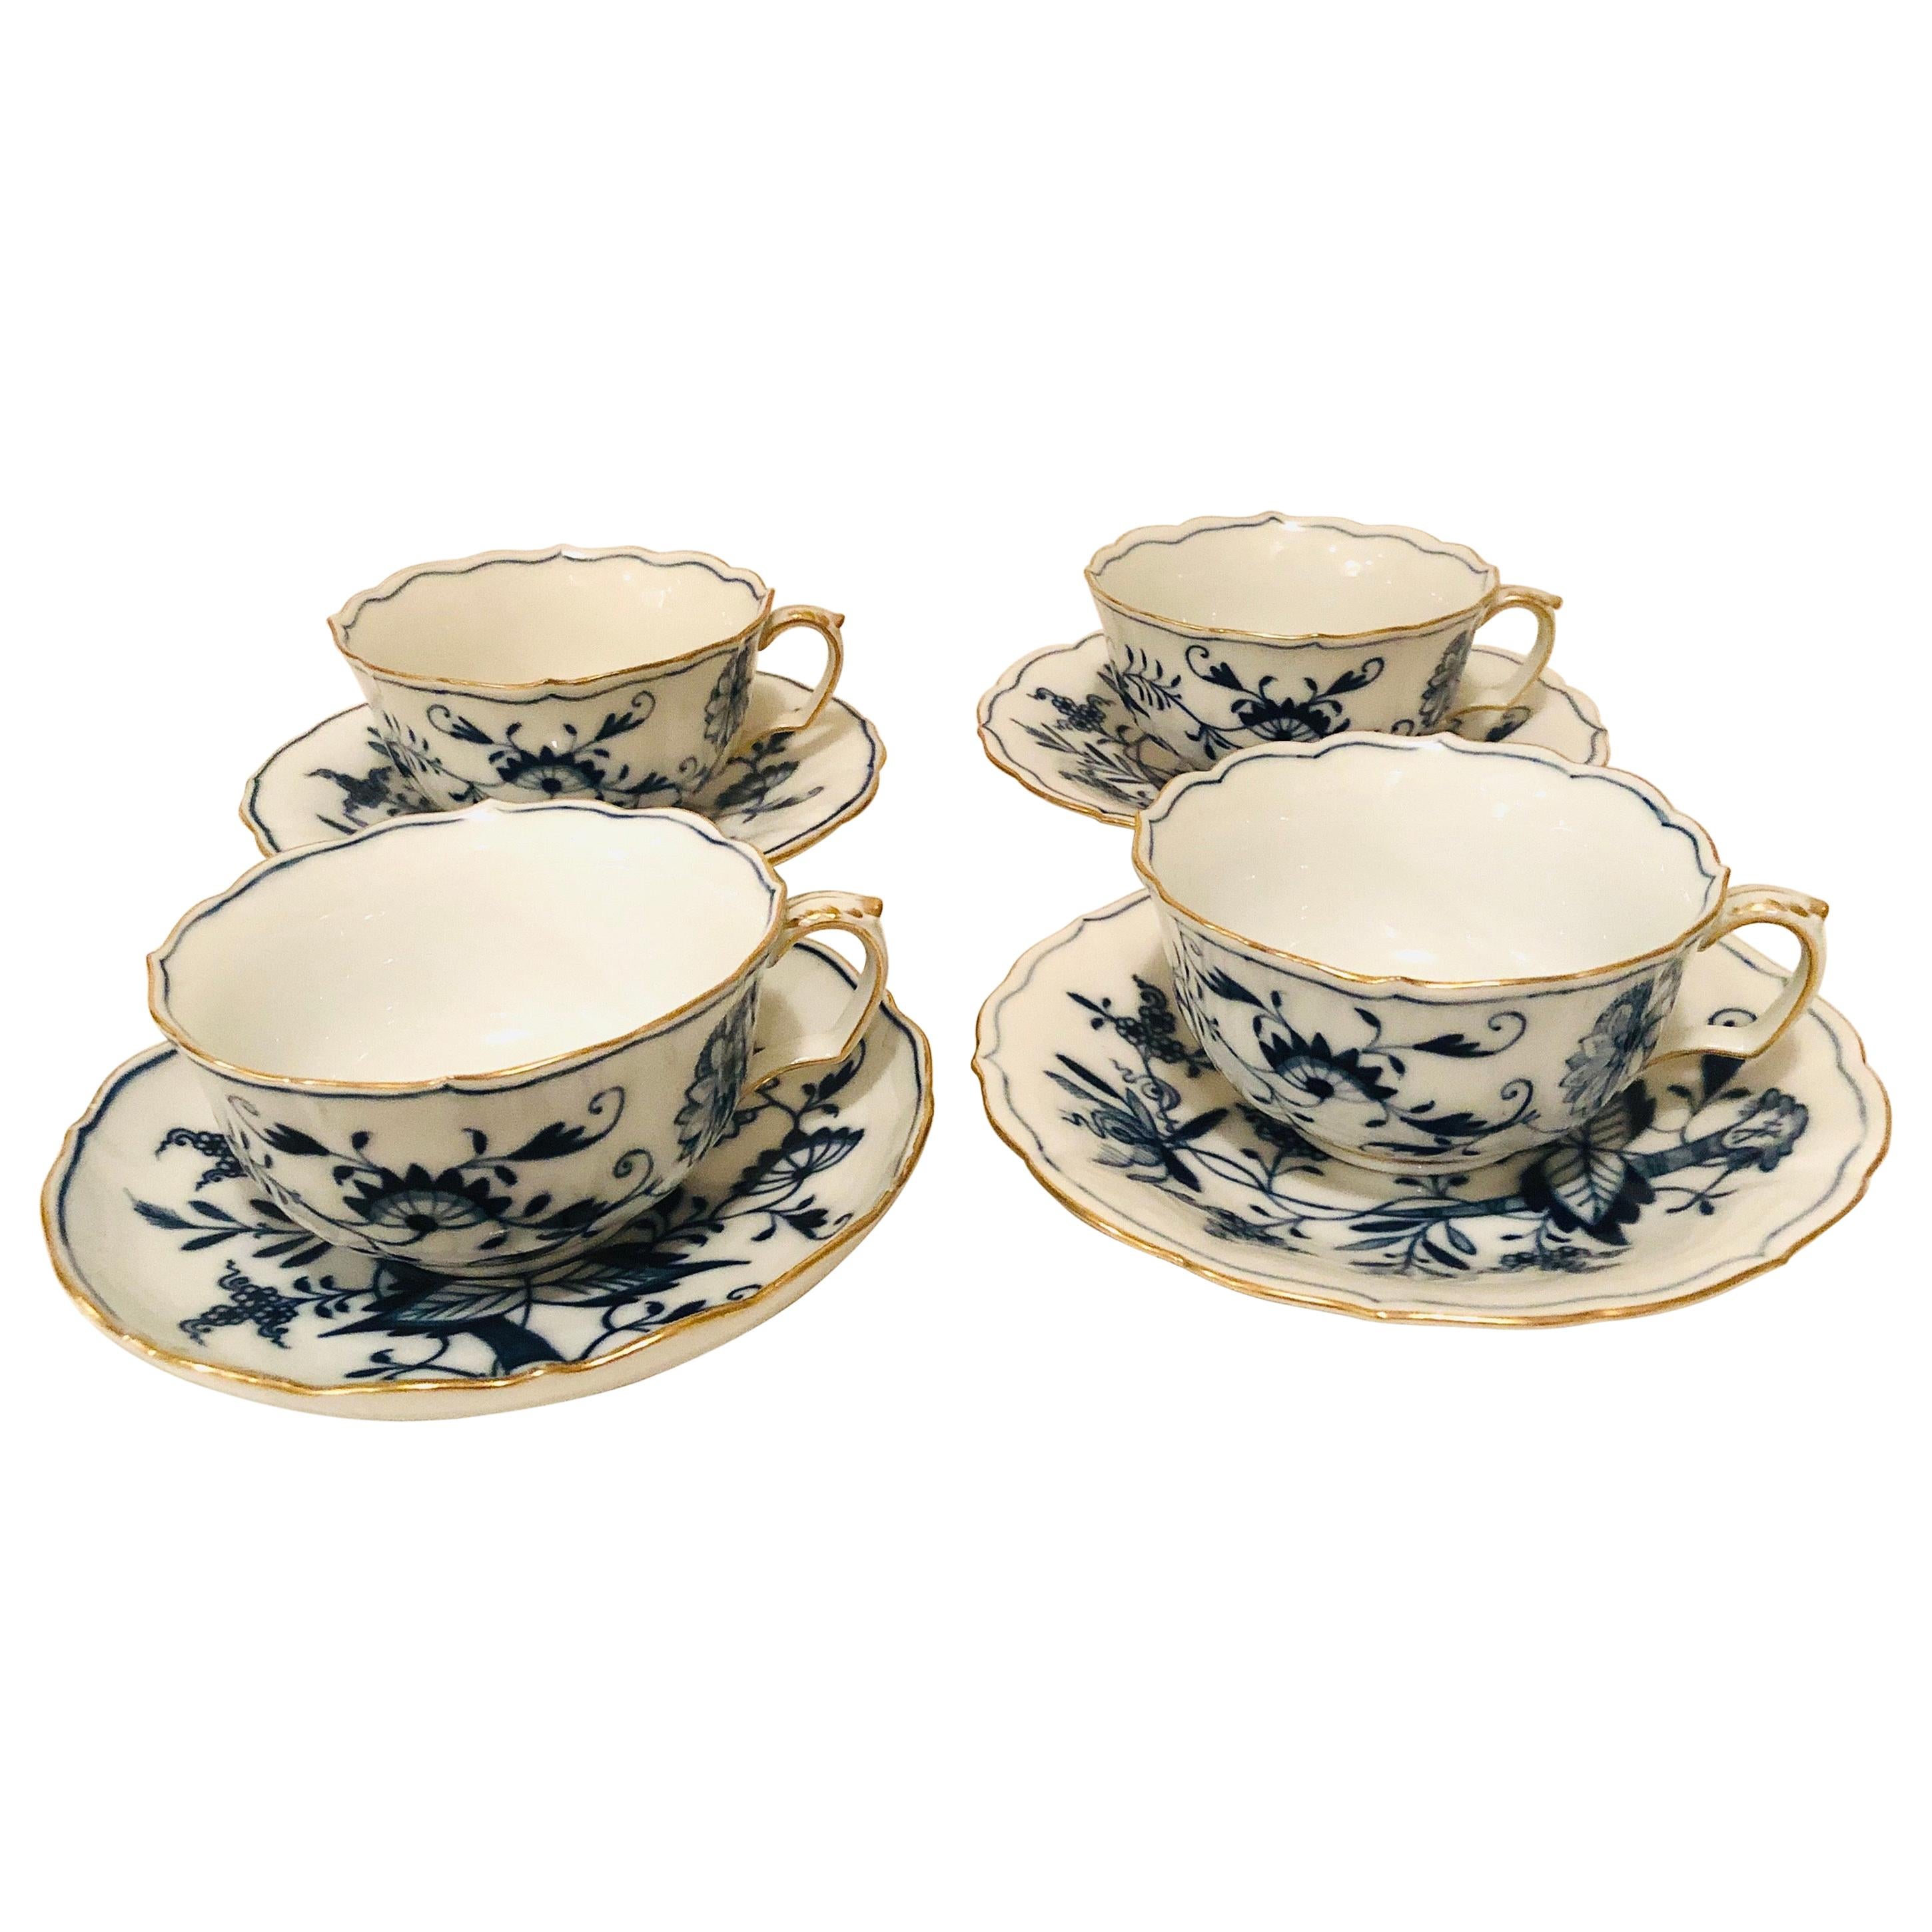 Set of 12 Meissen Blue Onion Teacups and Saucers with a Gold Rim